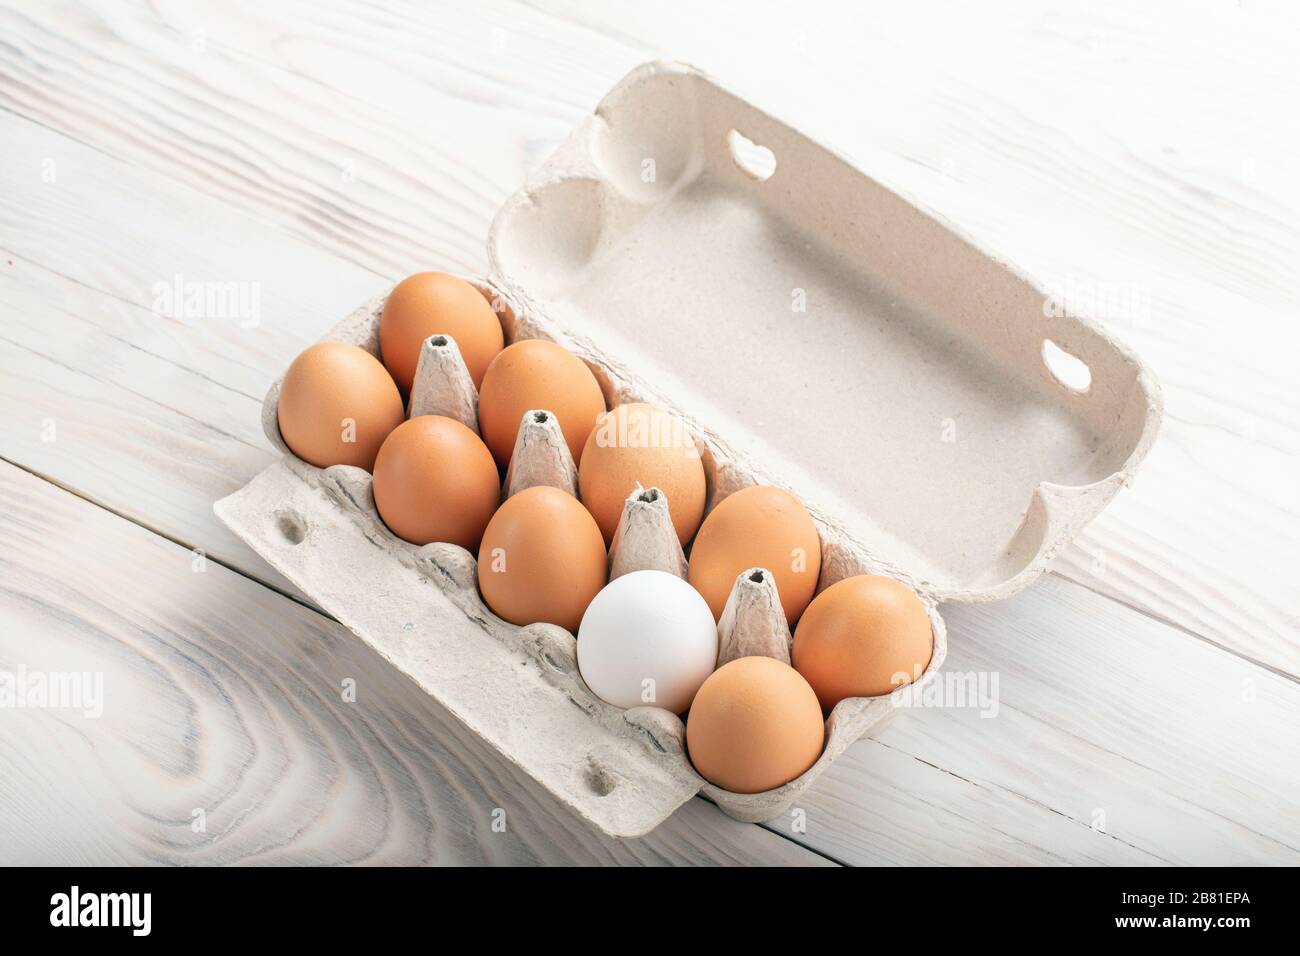 brown eggs and among them one white egg in carton box. Concept of difference, dissimilarity, stranger. space for text. Stock Photo